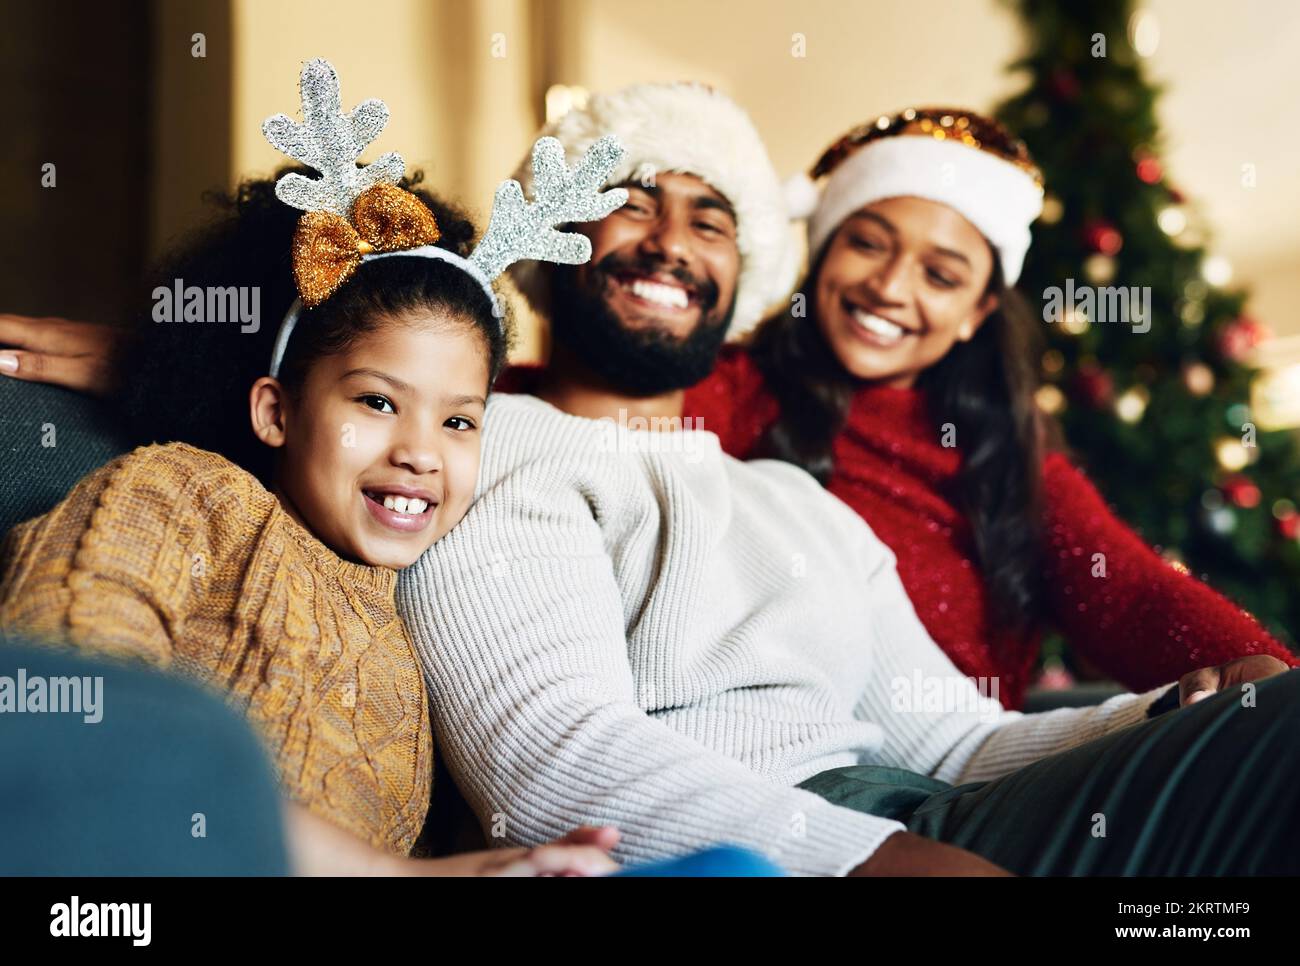 Happy family, christmas hat or bonding in house or home living room on celebration holiday, festive event or vacation. Portrait, smile or xmas girl Stock Photo